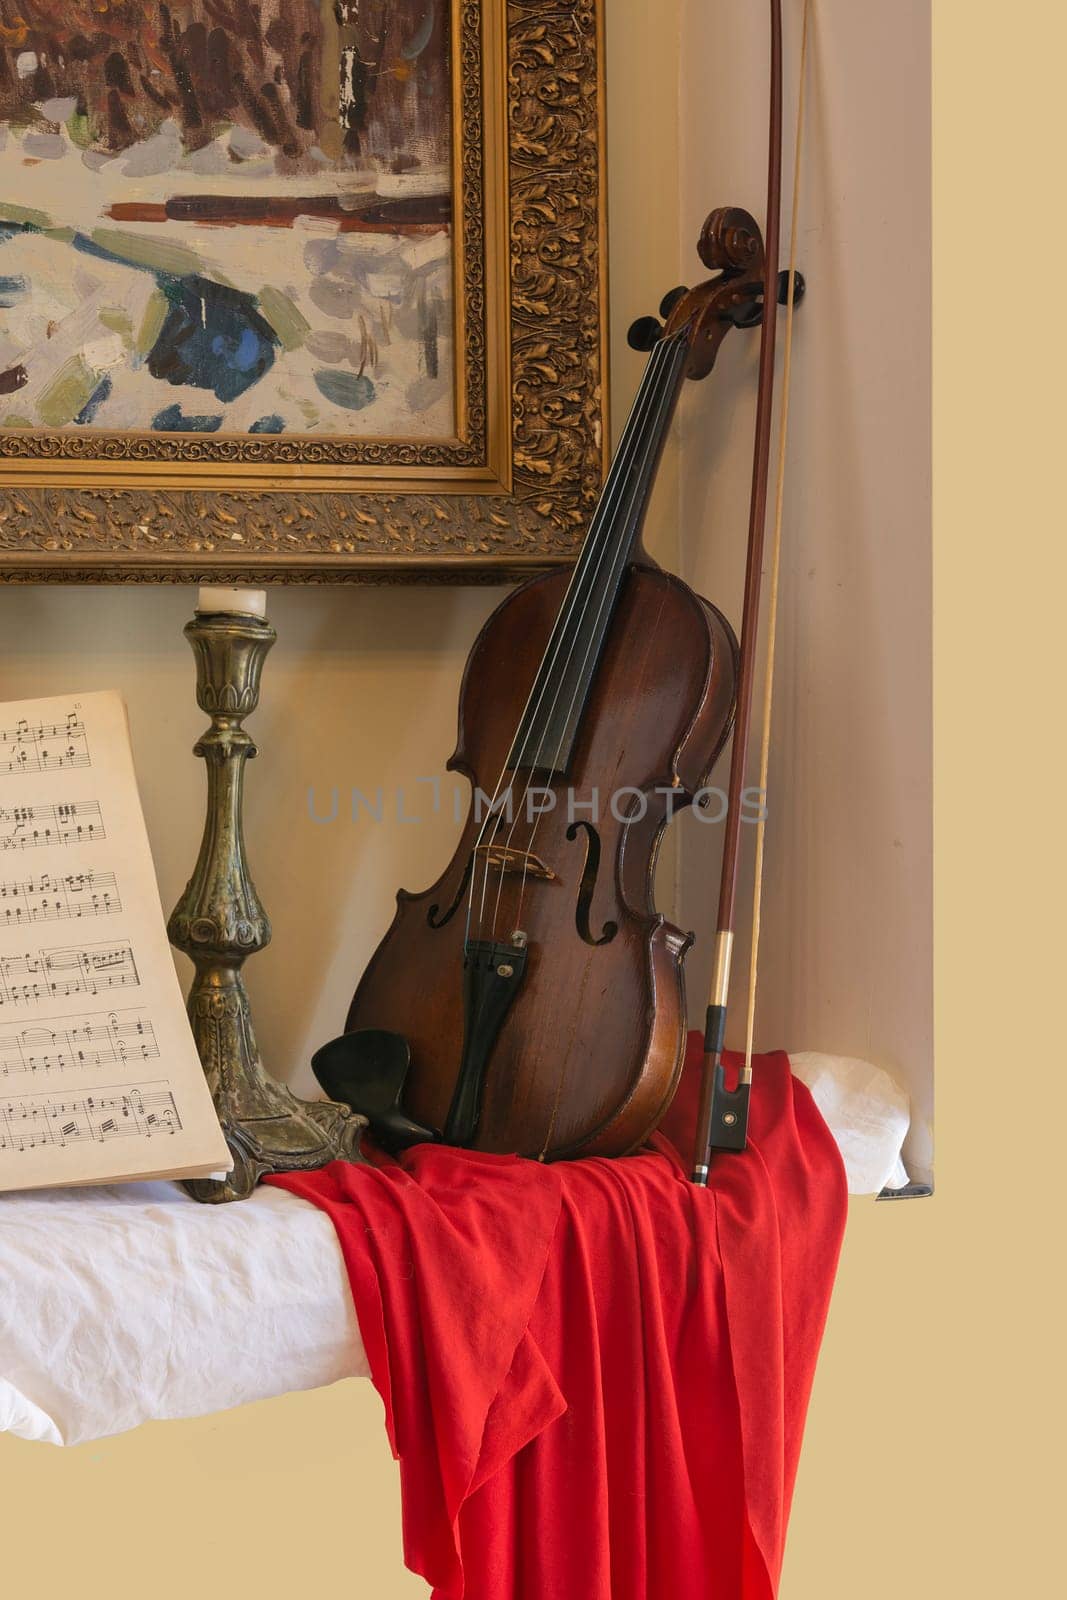 Violin leaning against the wall under the painting